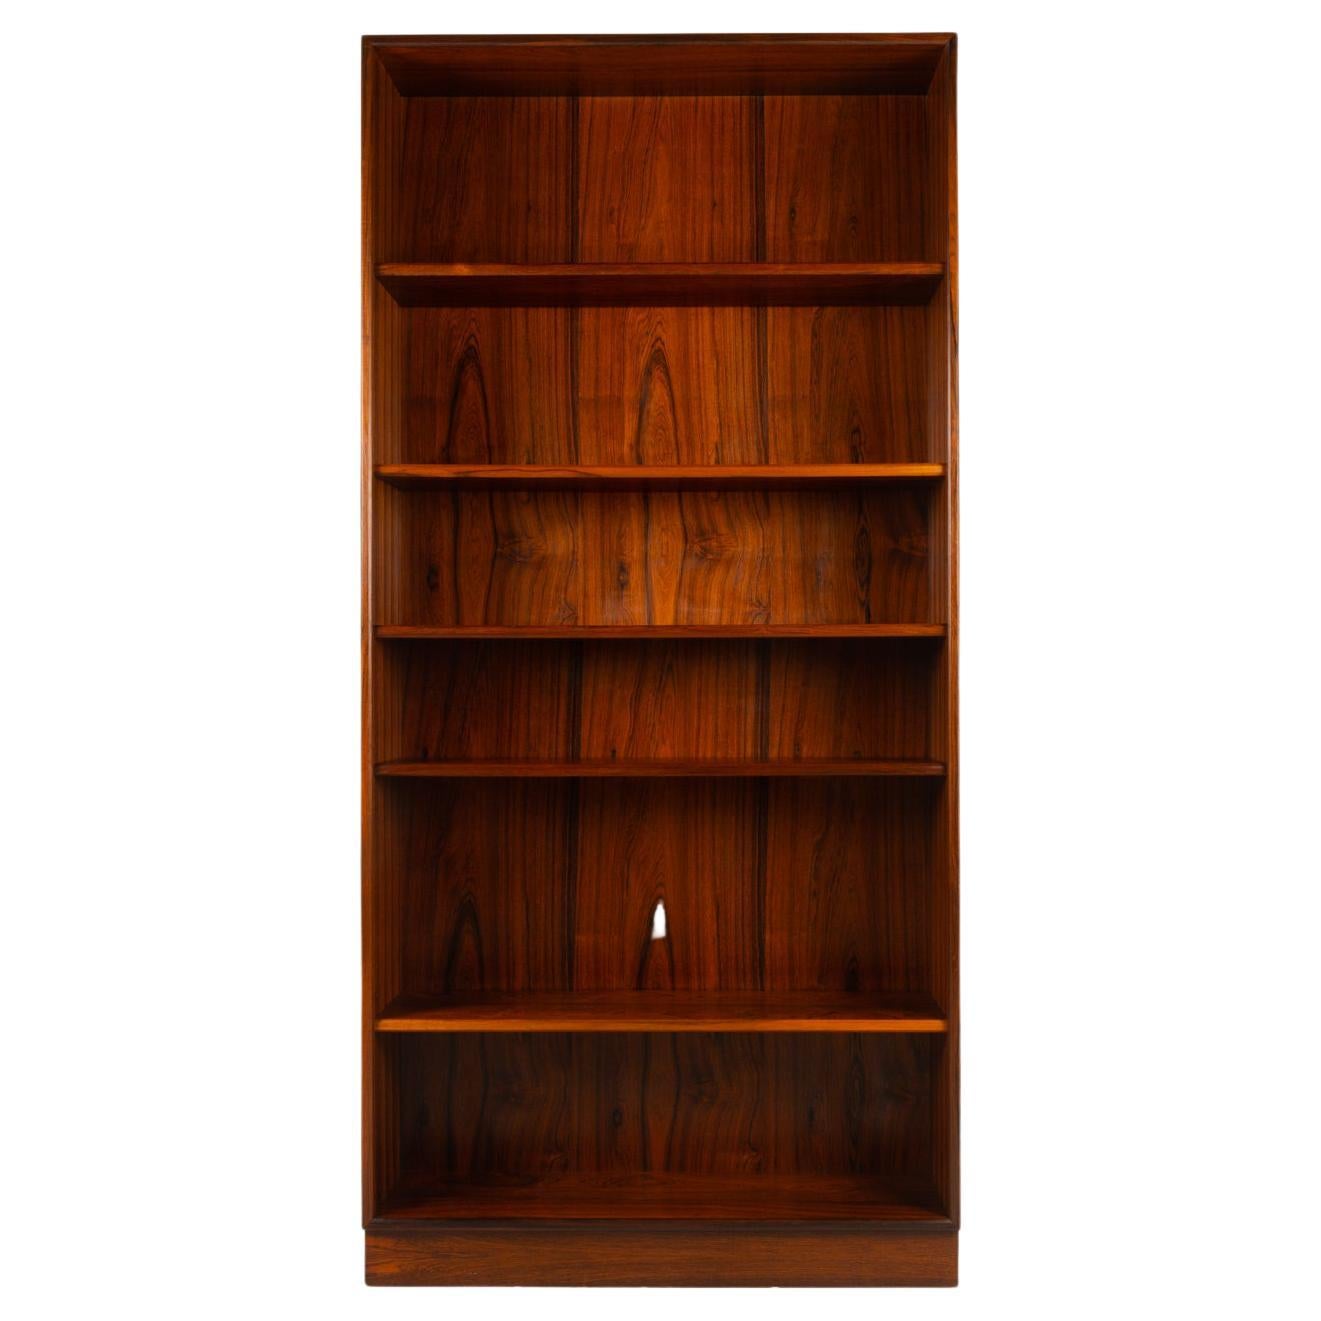 Danish rosewood bookcase 1960s
Danish Mid-Century Modern minimalistic shelving unit with six shelves including bottom shelf. Four shelves are height adjustable.
Beautiful vivid and expressive grain pattern. 
This bookshelf is suitable for many